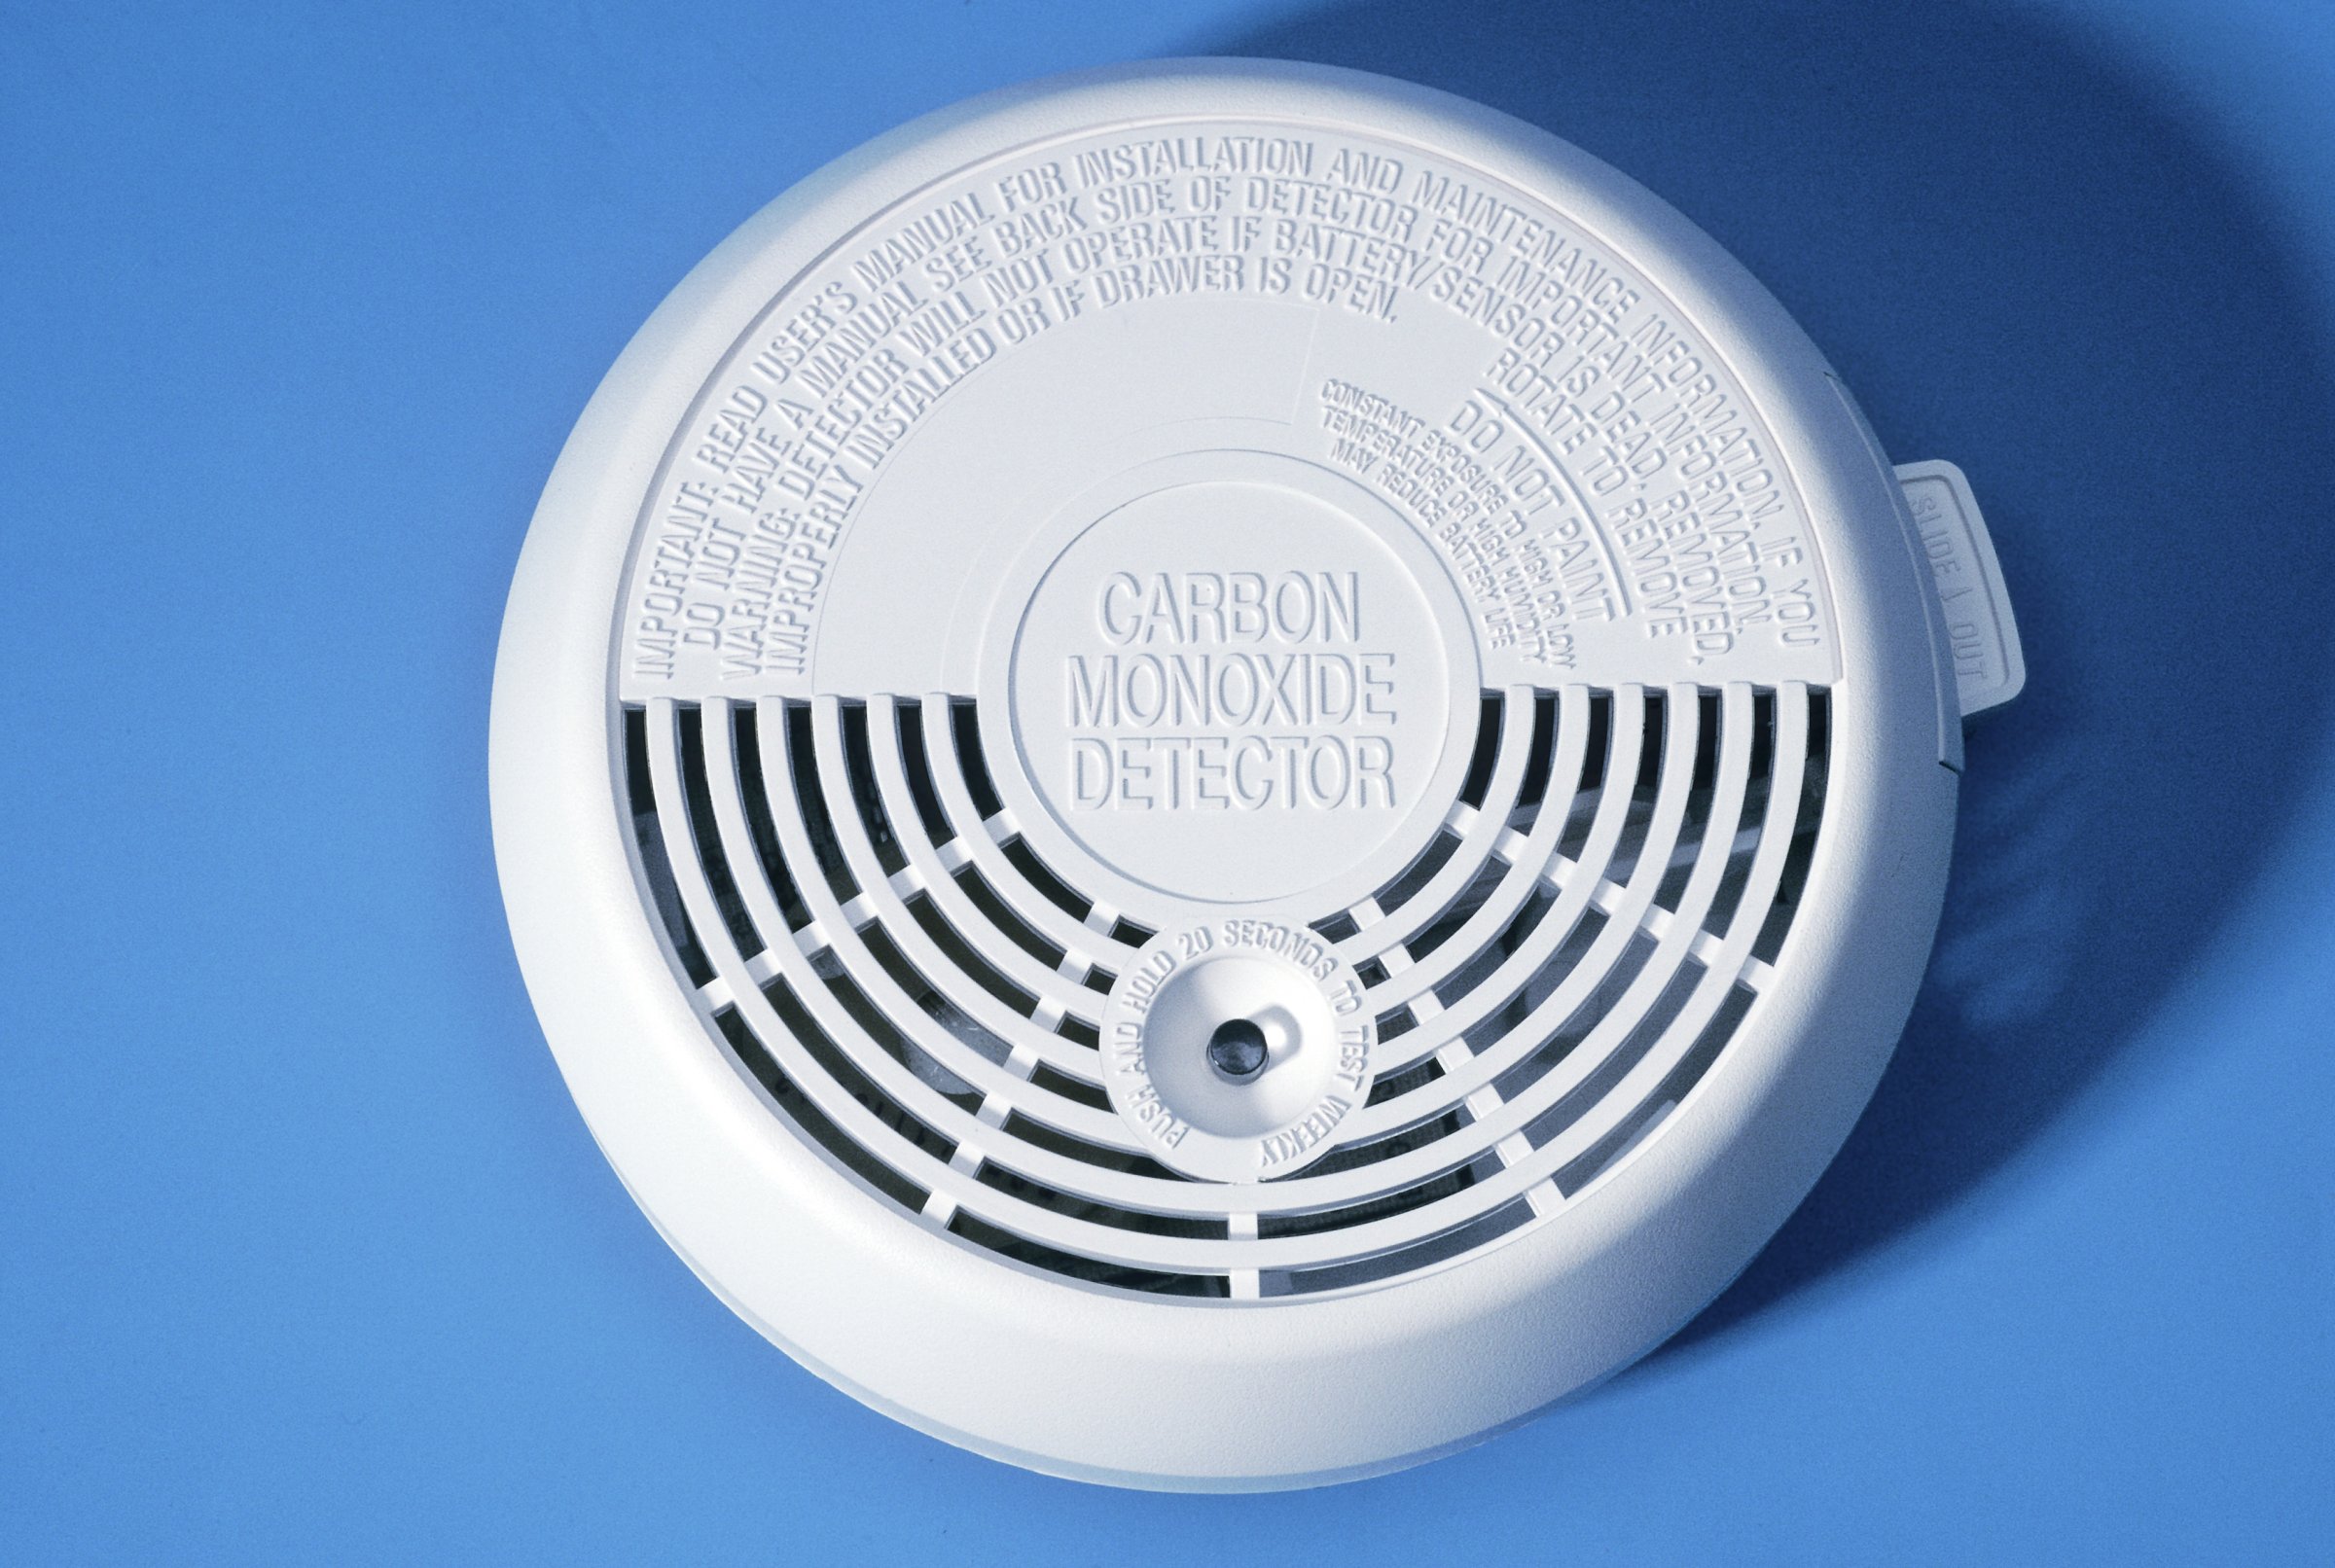 Carbon monoxide detector. Carbon monoxide (CO) is a colorless, odorless gas that can lead to carbon monoxide poisoning, a type of asphyxiation. Household gas boilers that are working incorrectly may produce high levels of CO. Detectors situated in kitchens